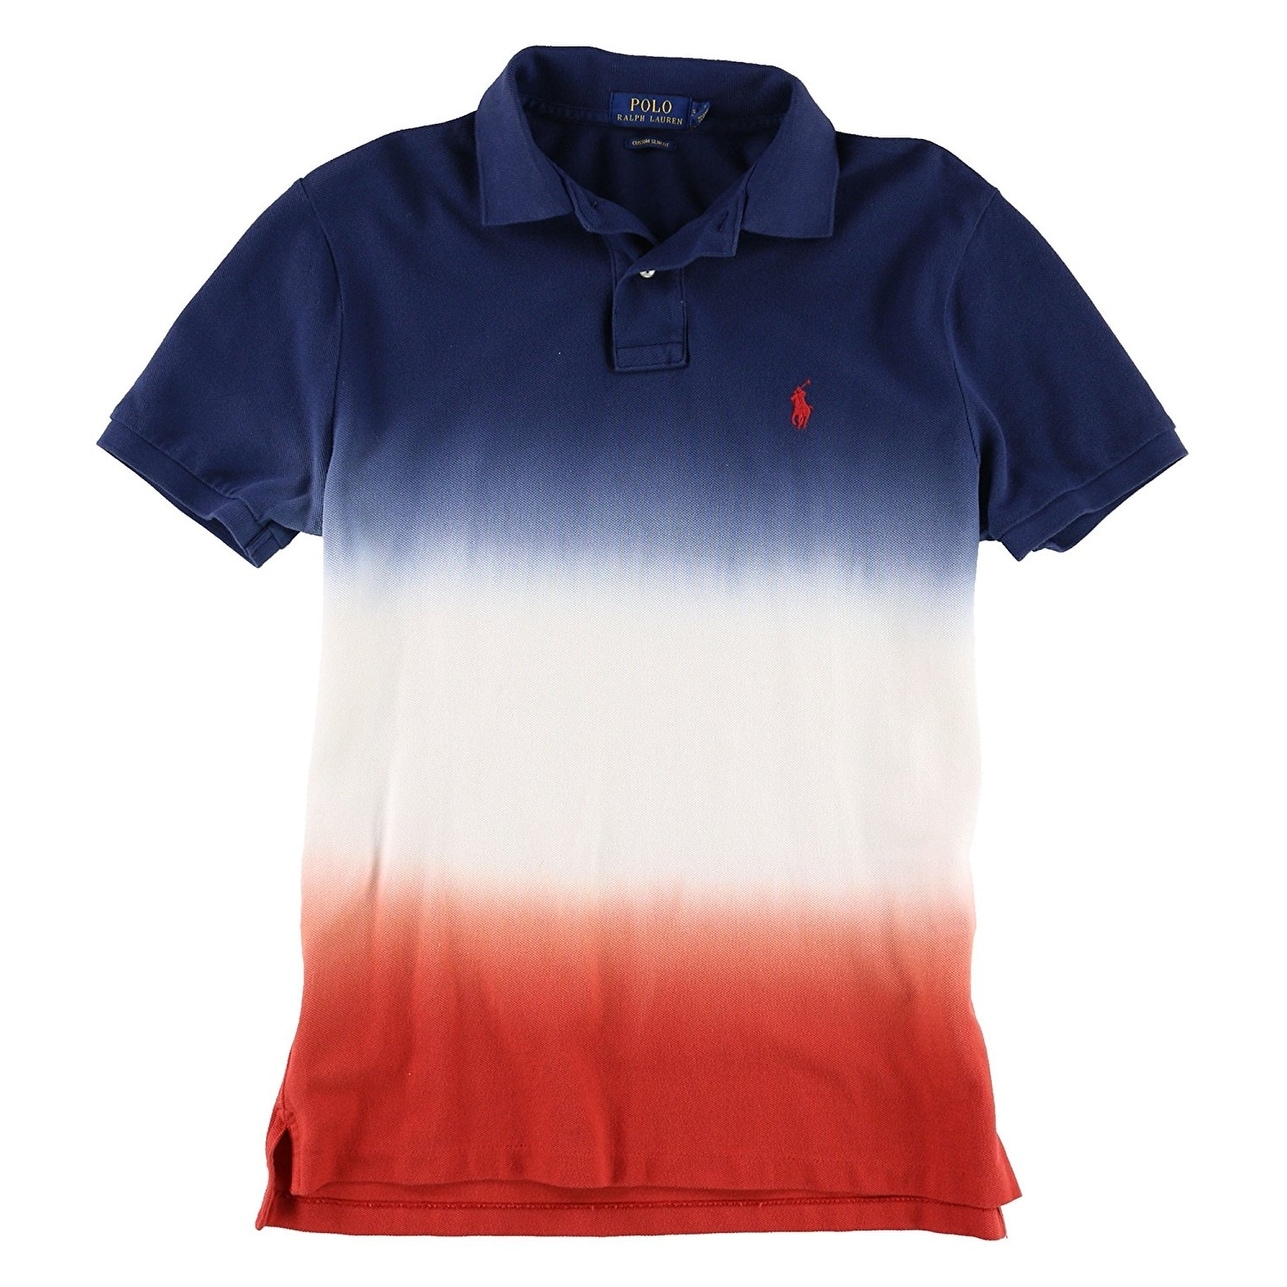 polo ralph lauren red white and blue shirt